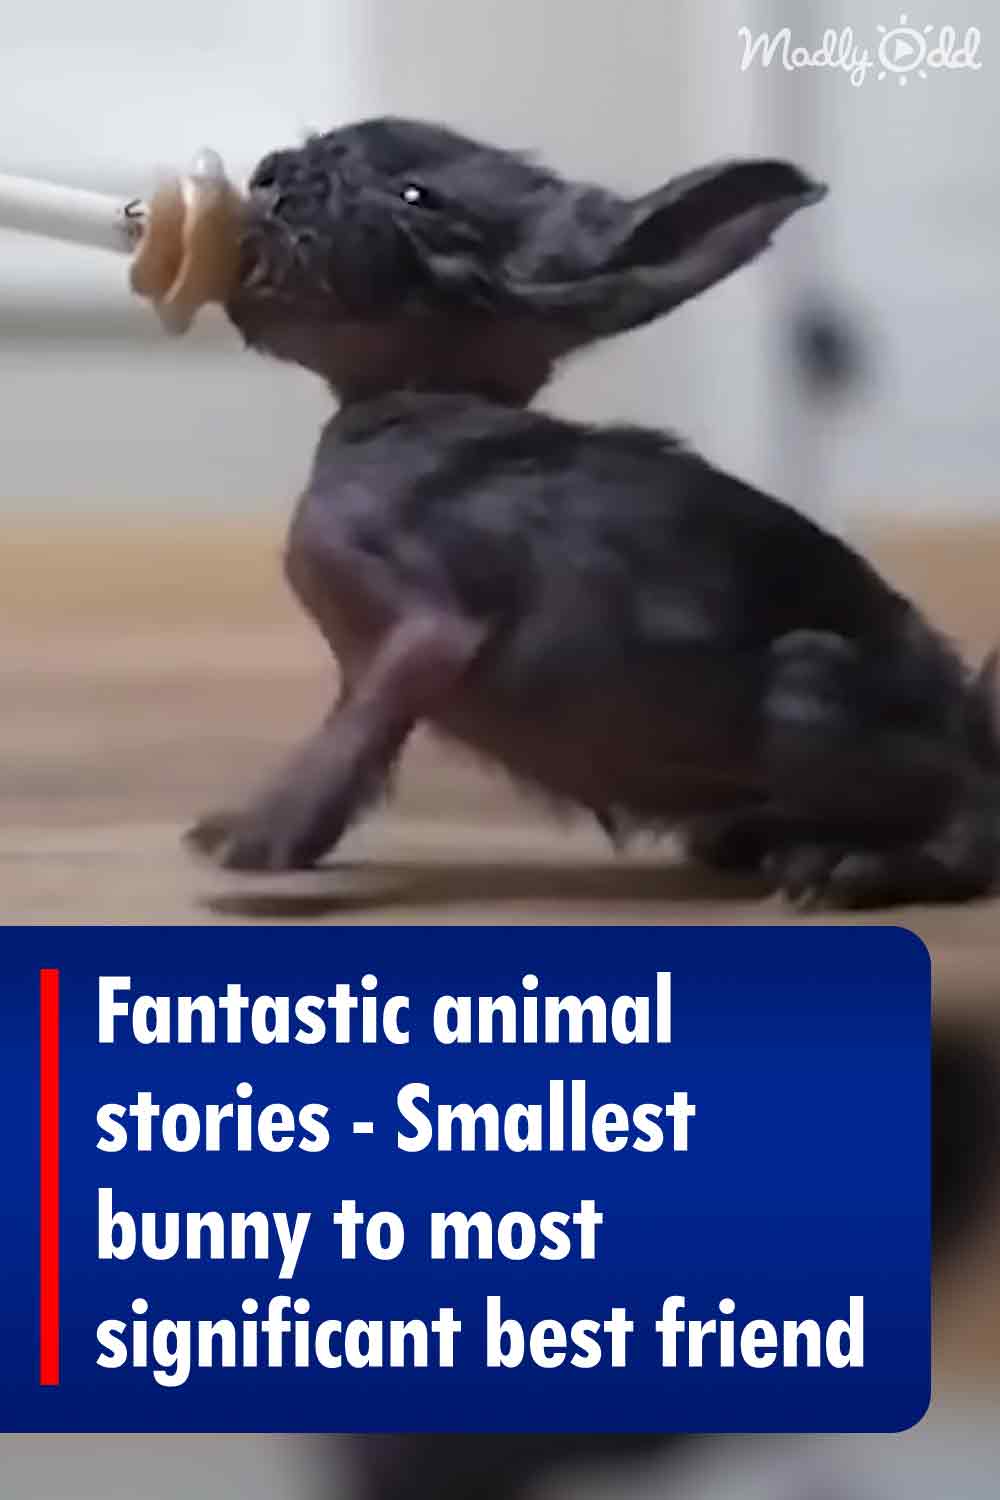 Fantastic animal stories - Smallest bunny to most significant best friend